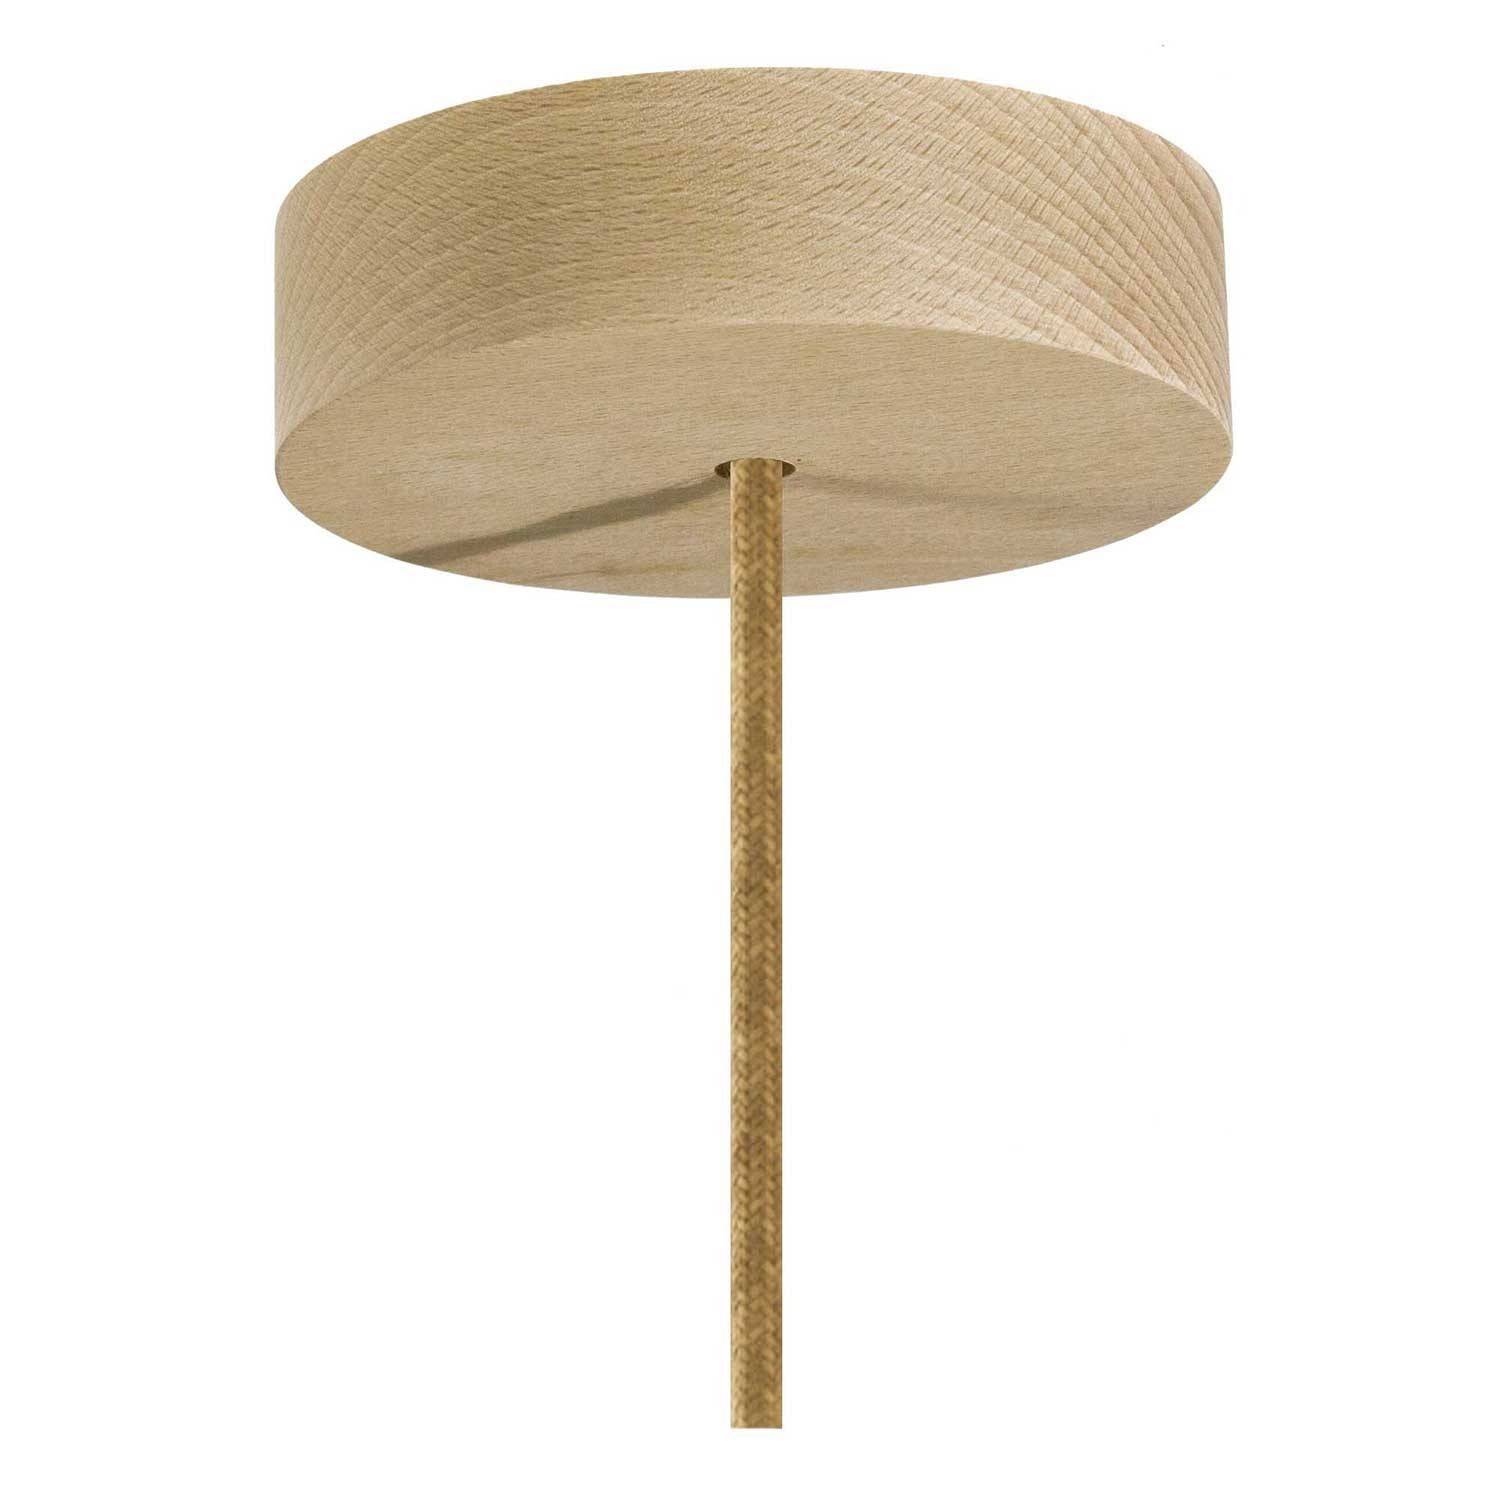 Pendant lamp with textile cable, raffia Cylinder lampshade and metal details - Made in Italy